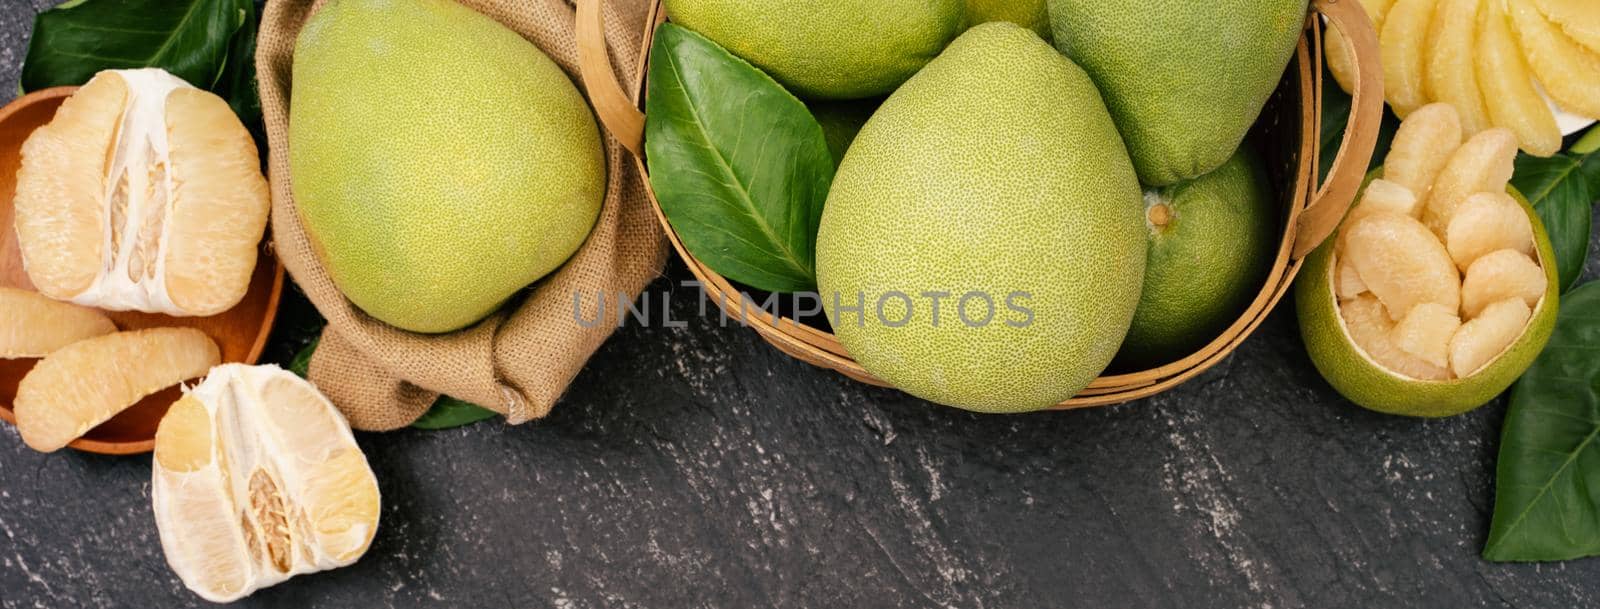 Fresh peeled pomelo, pummelo, grapefruit, shaddock on dark background in bamboo basket. Autumn seasonal fruit, top view, flat lay, tabletop shot. by ROMIXIMAGE